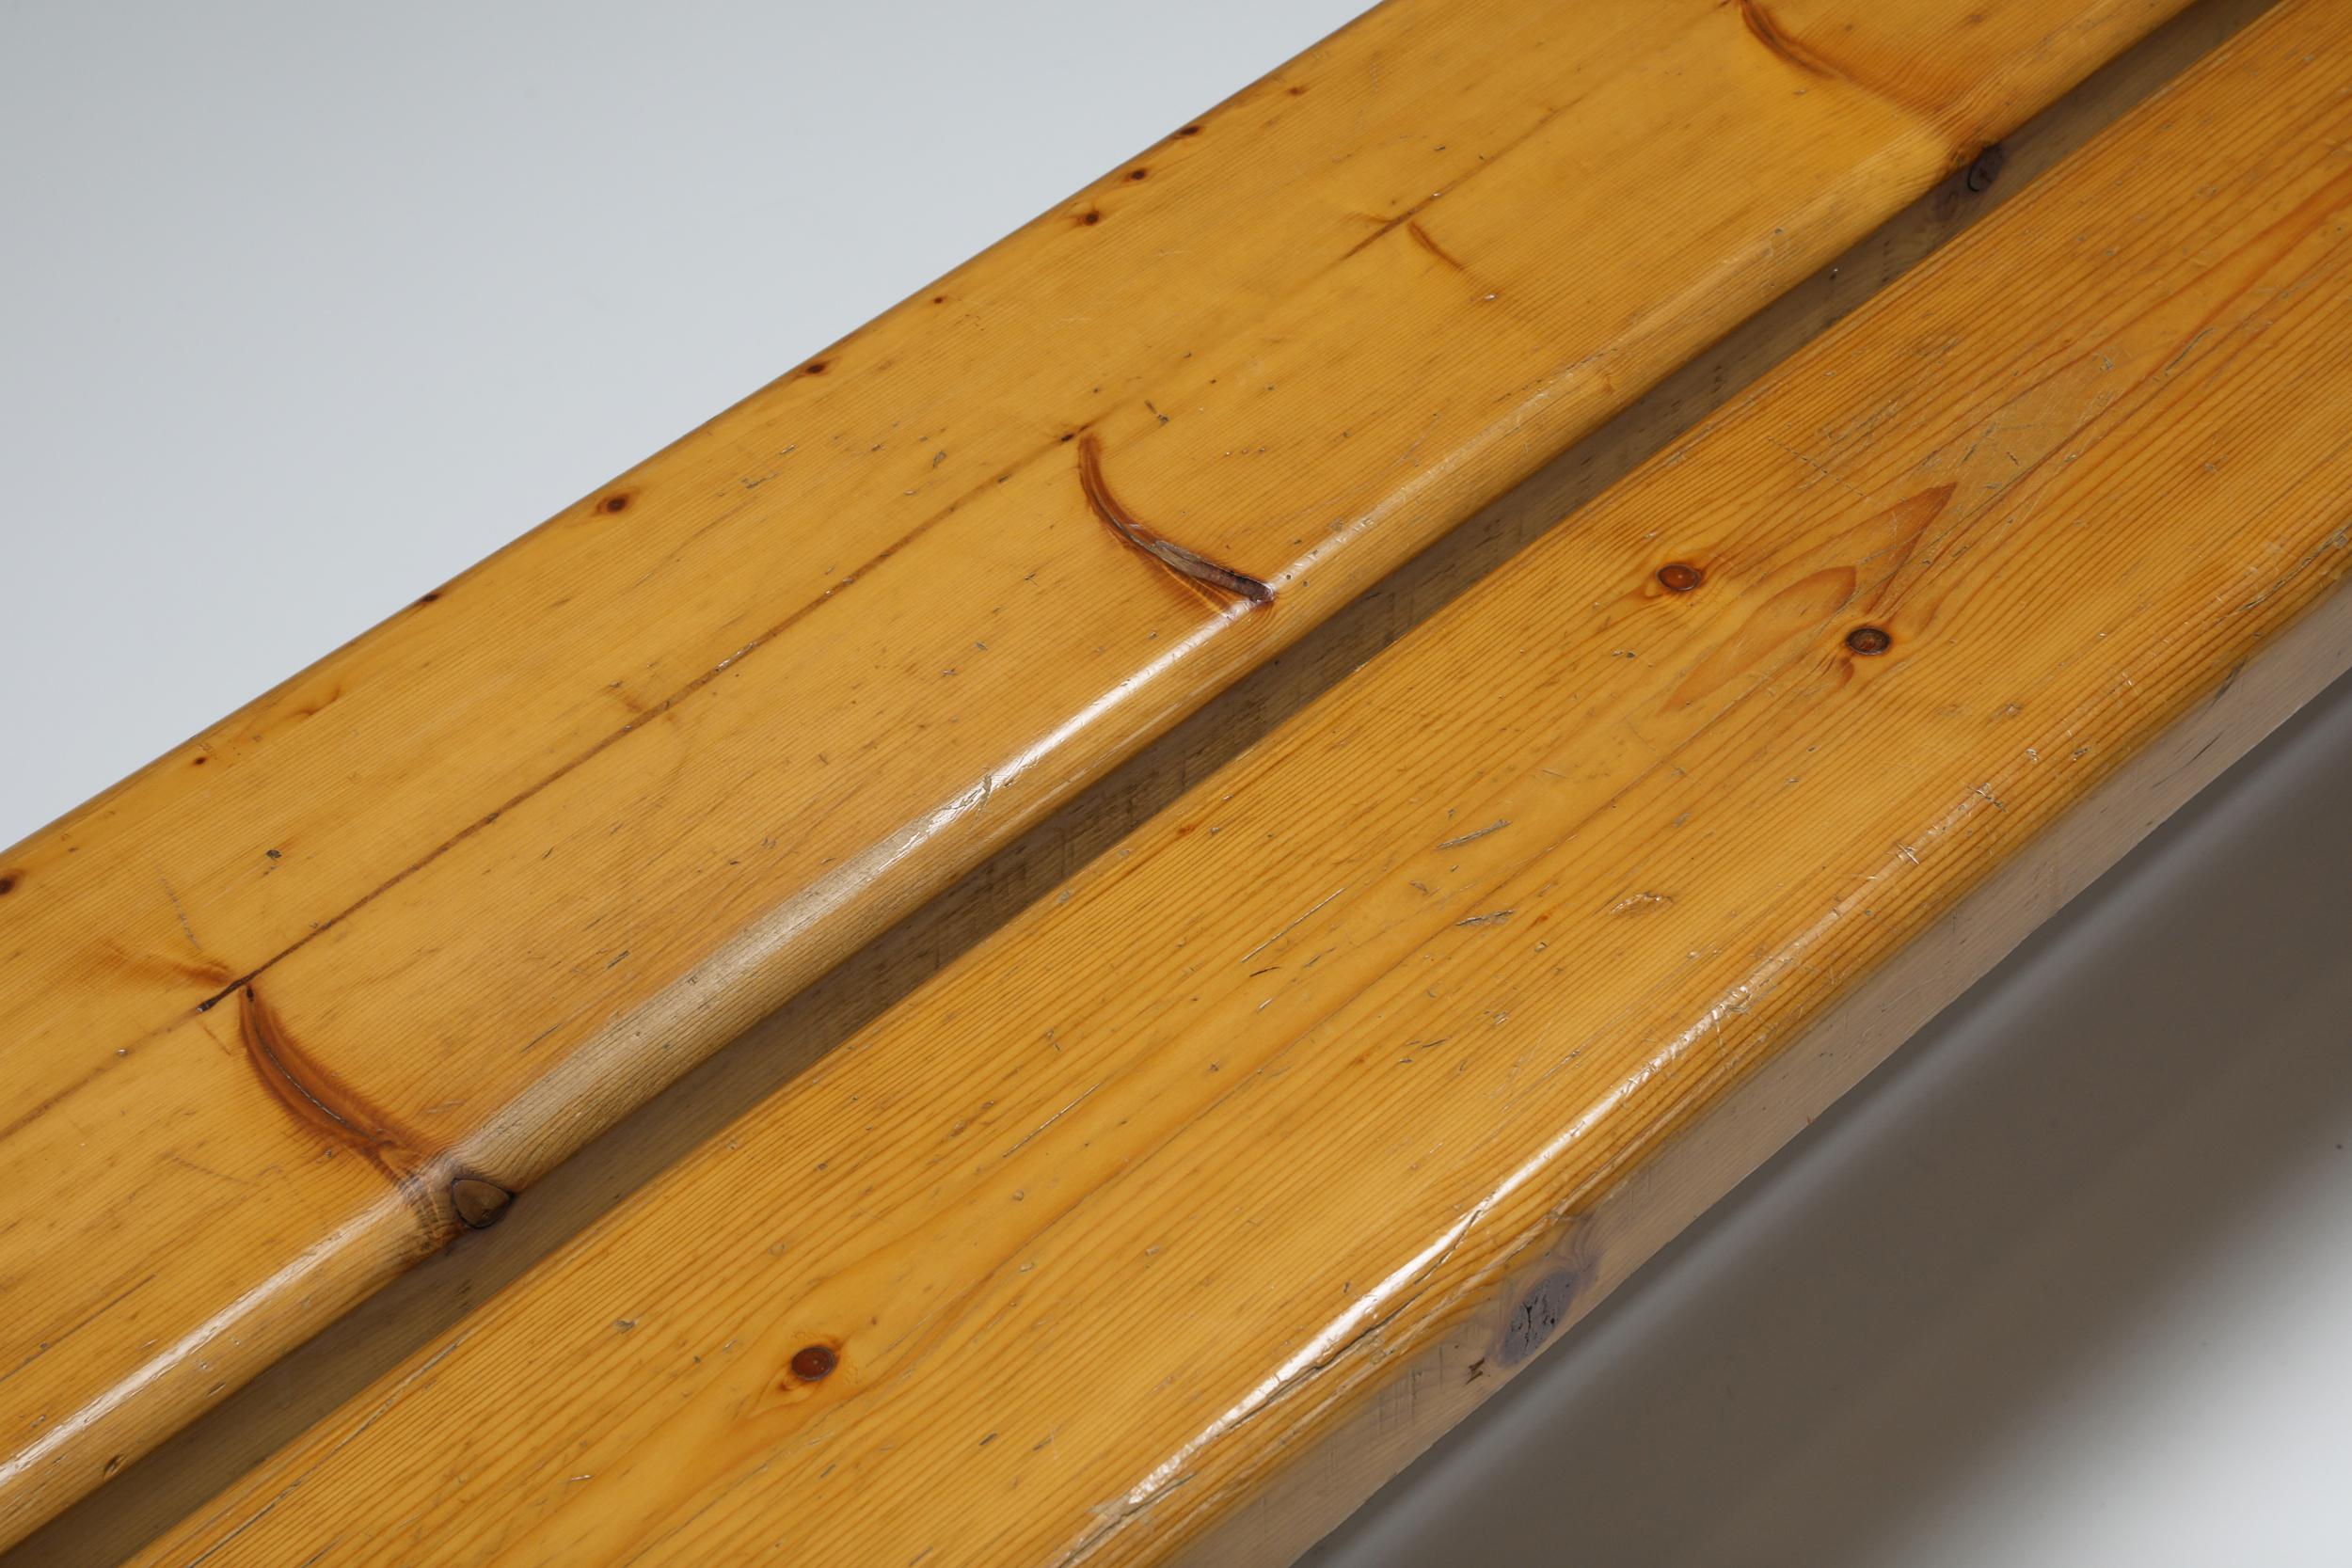 Mid-Century Modern Pine Bench Les Arc by Charlotte Perriand, French Modernism, 1970s For Sale